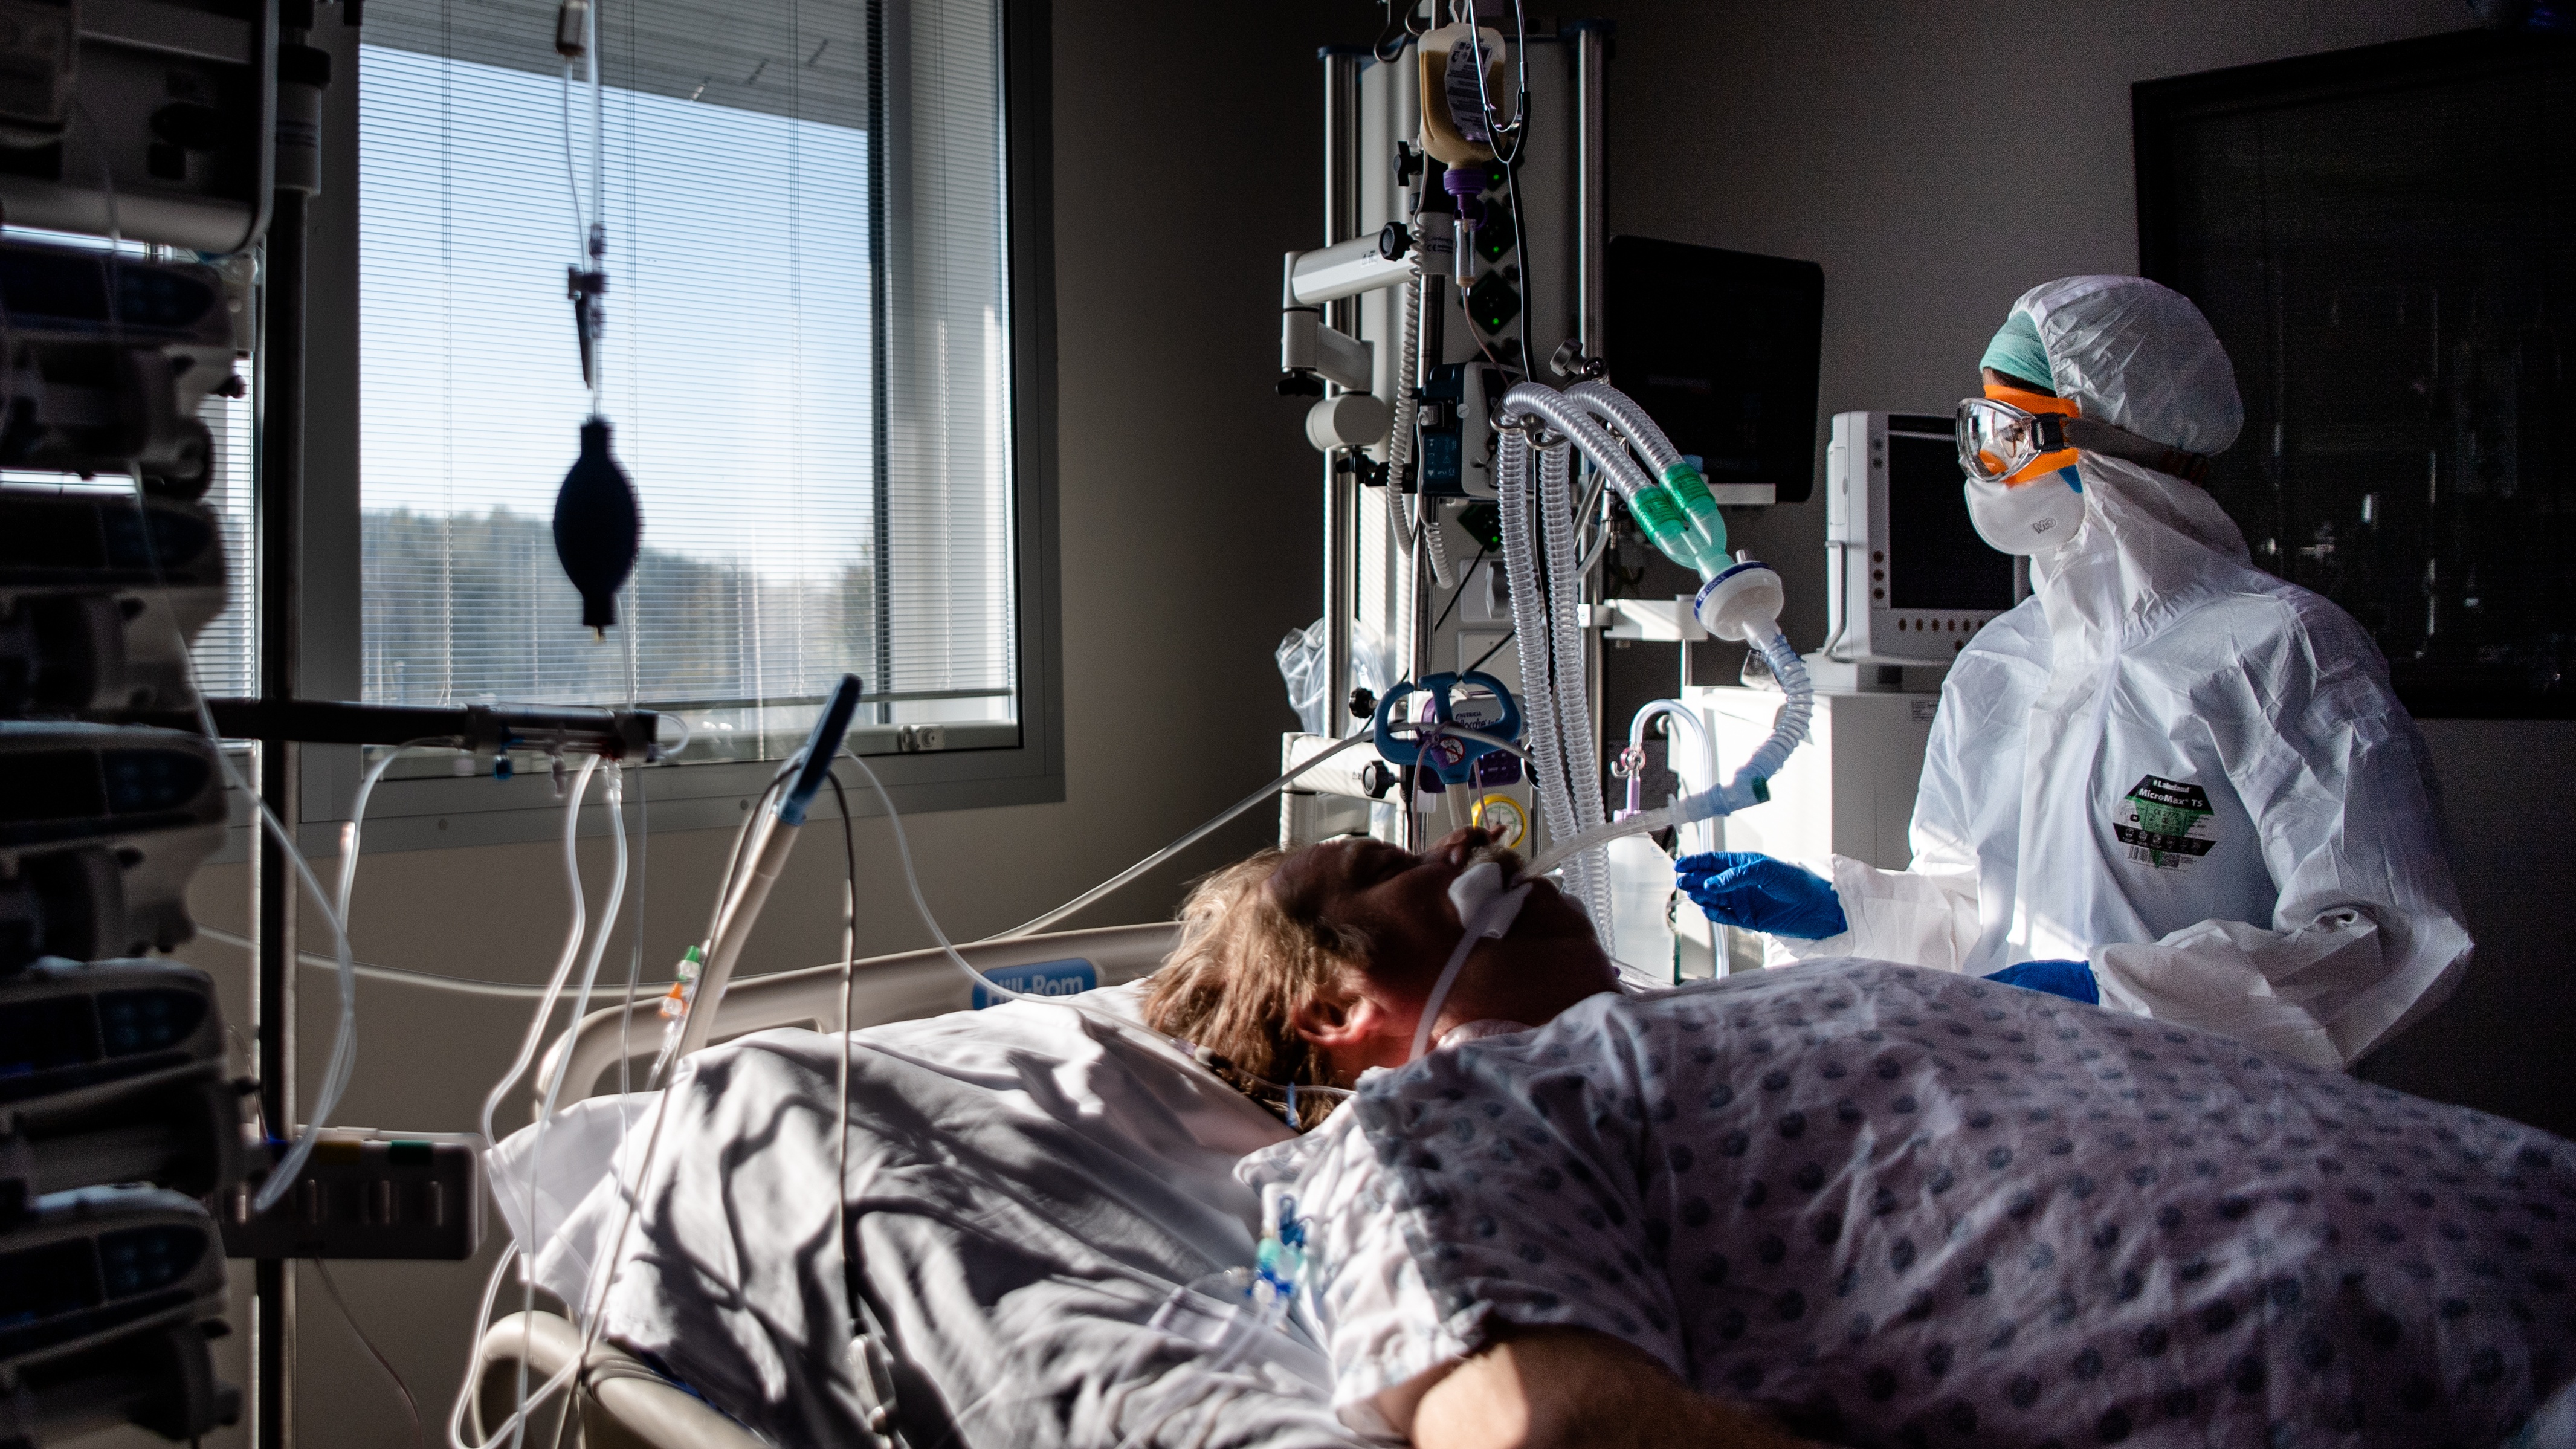 A nurse cares for a ventilated patient at the University Hospital of Charleroi